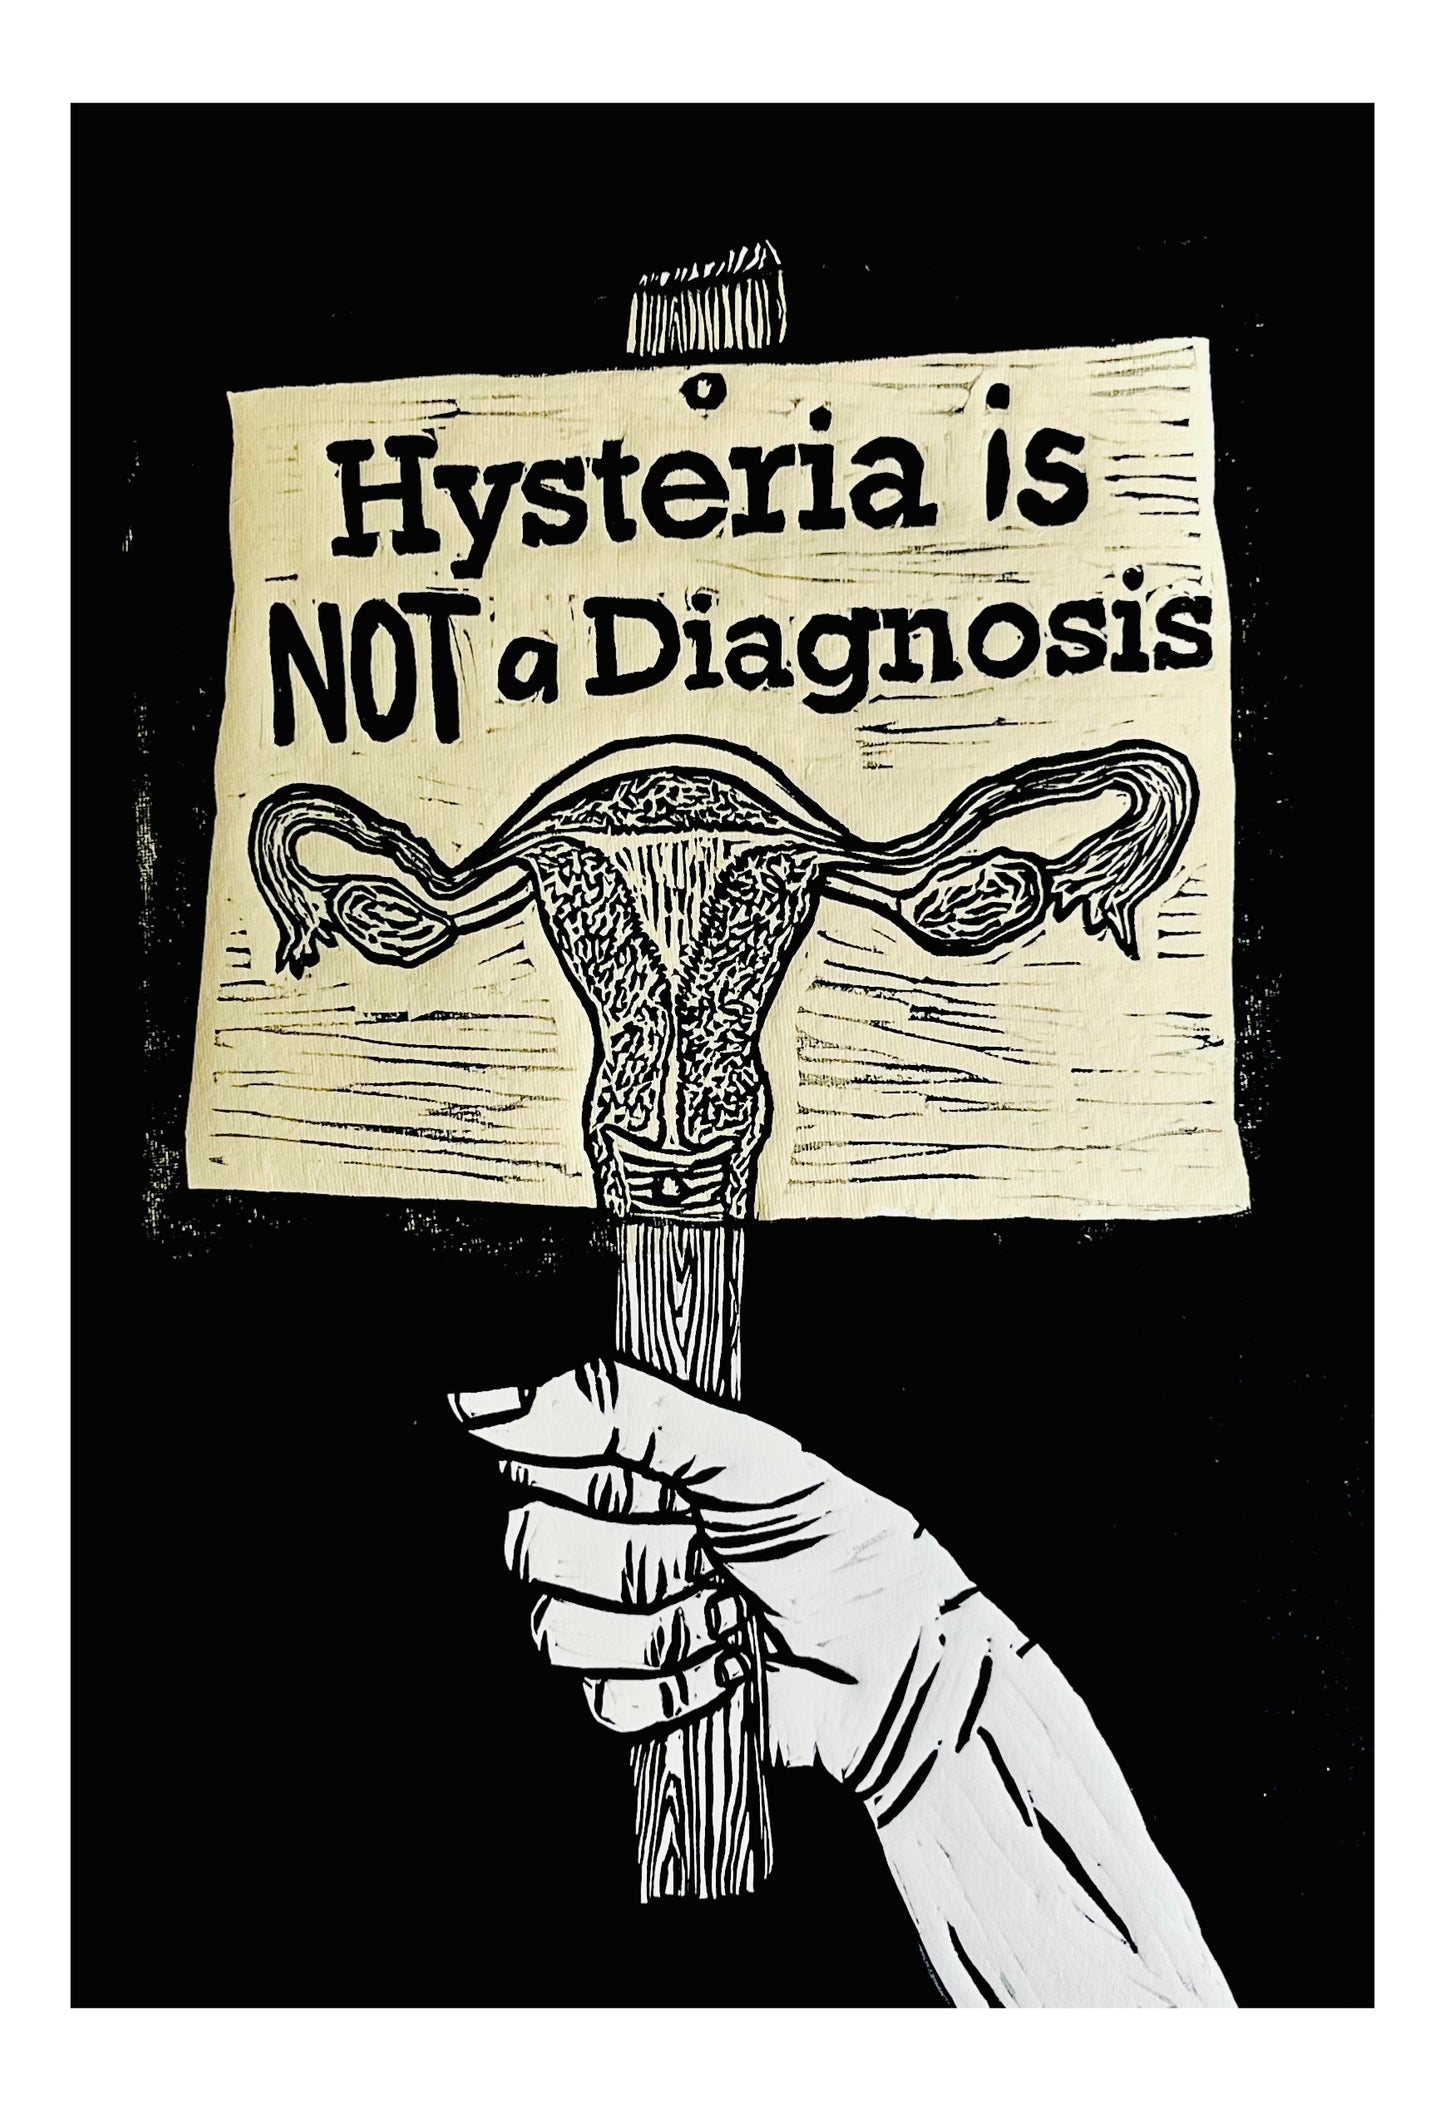 Hysteria is NOT a diagnosis!